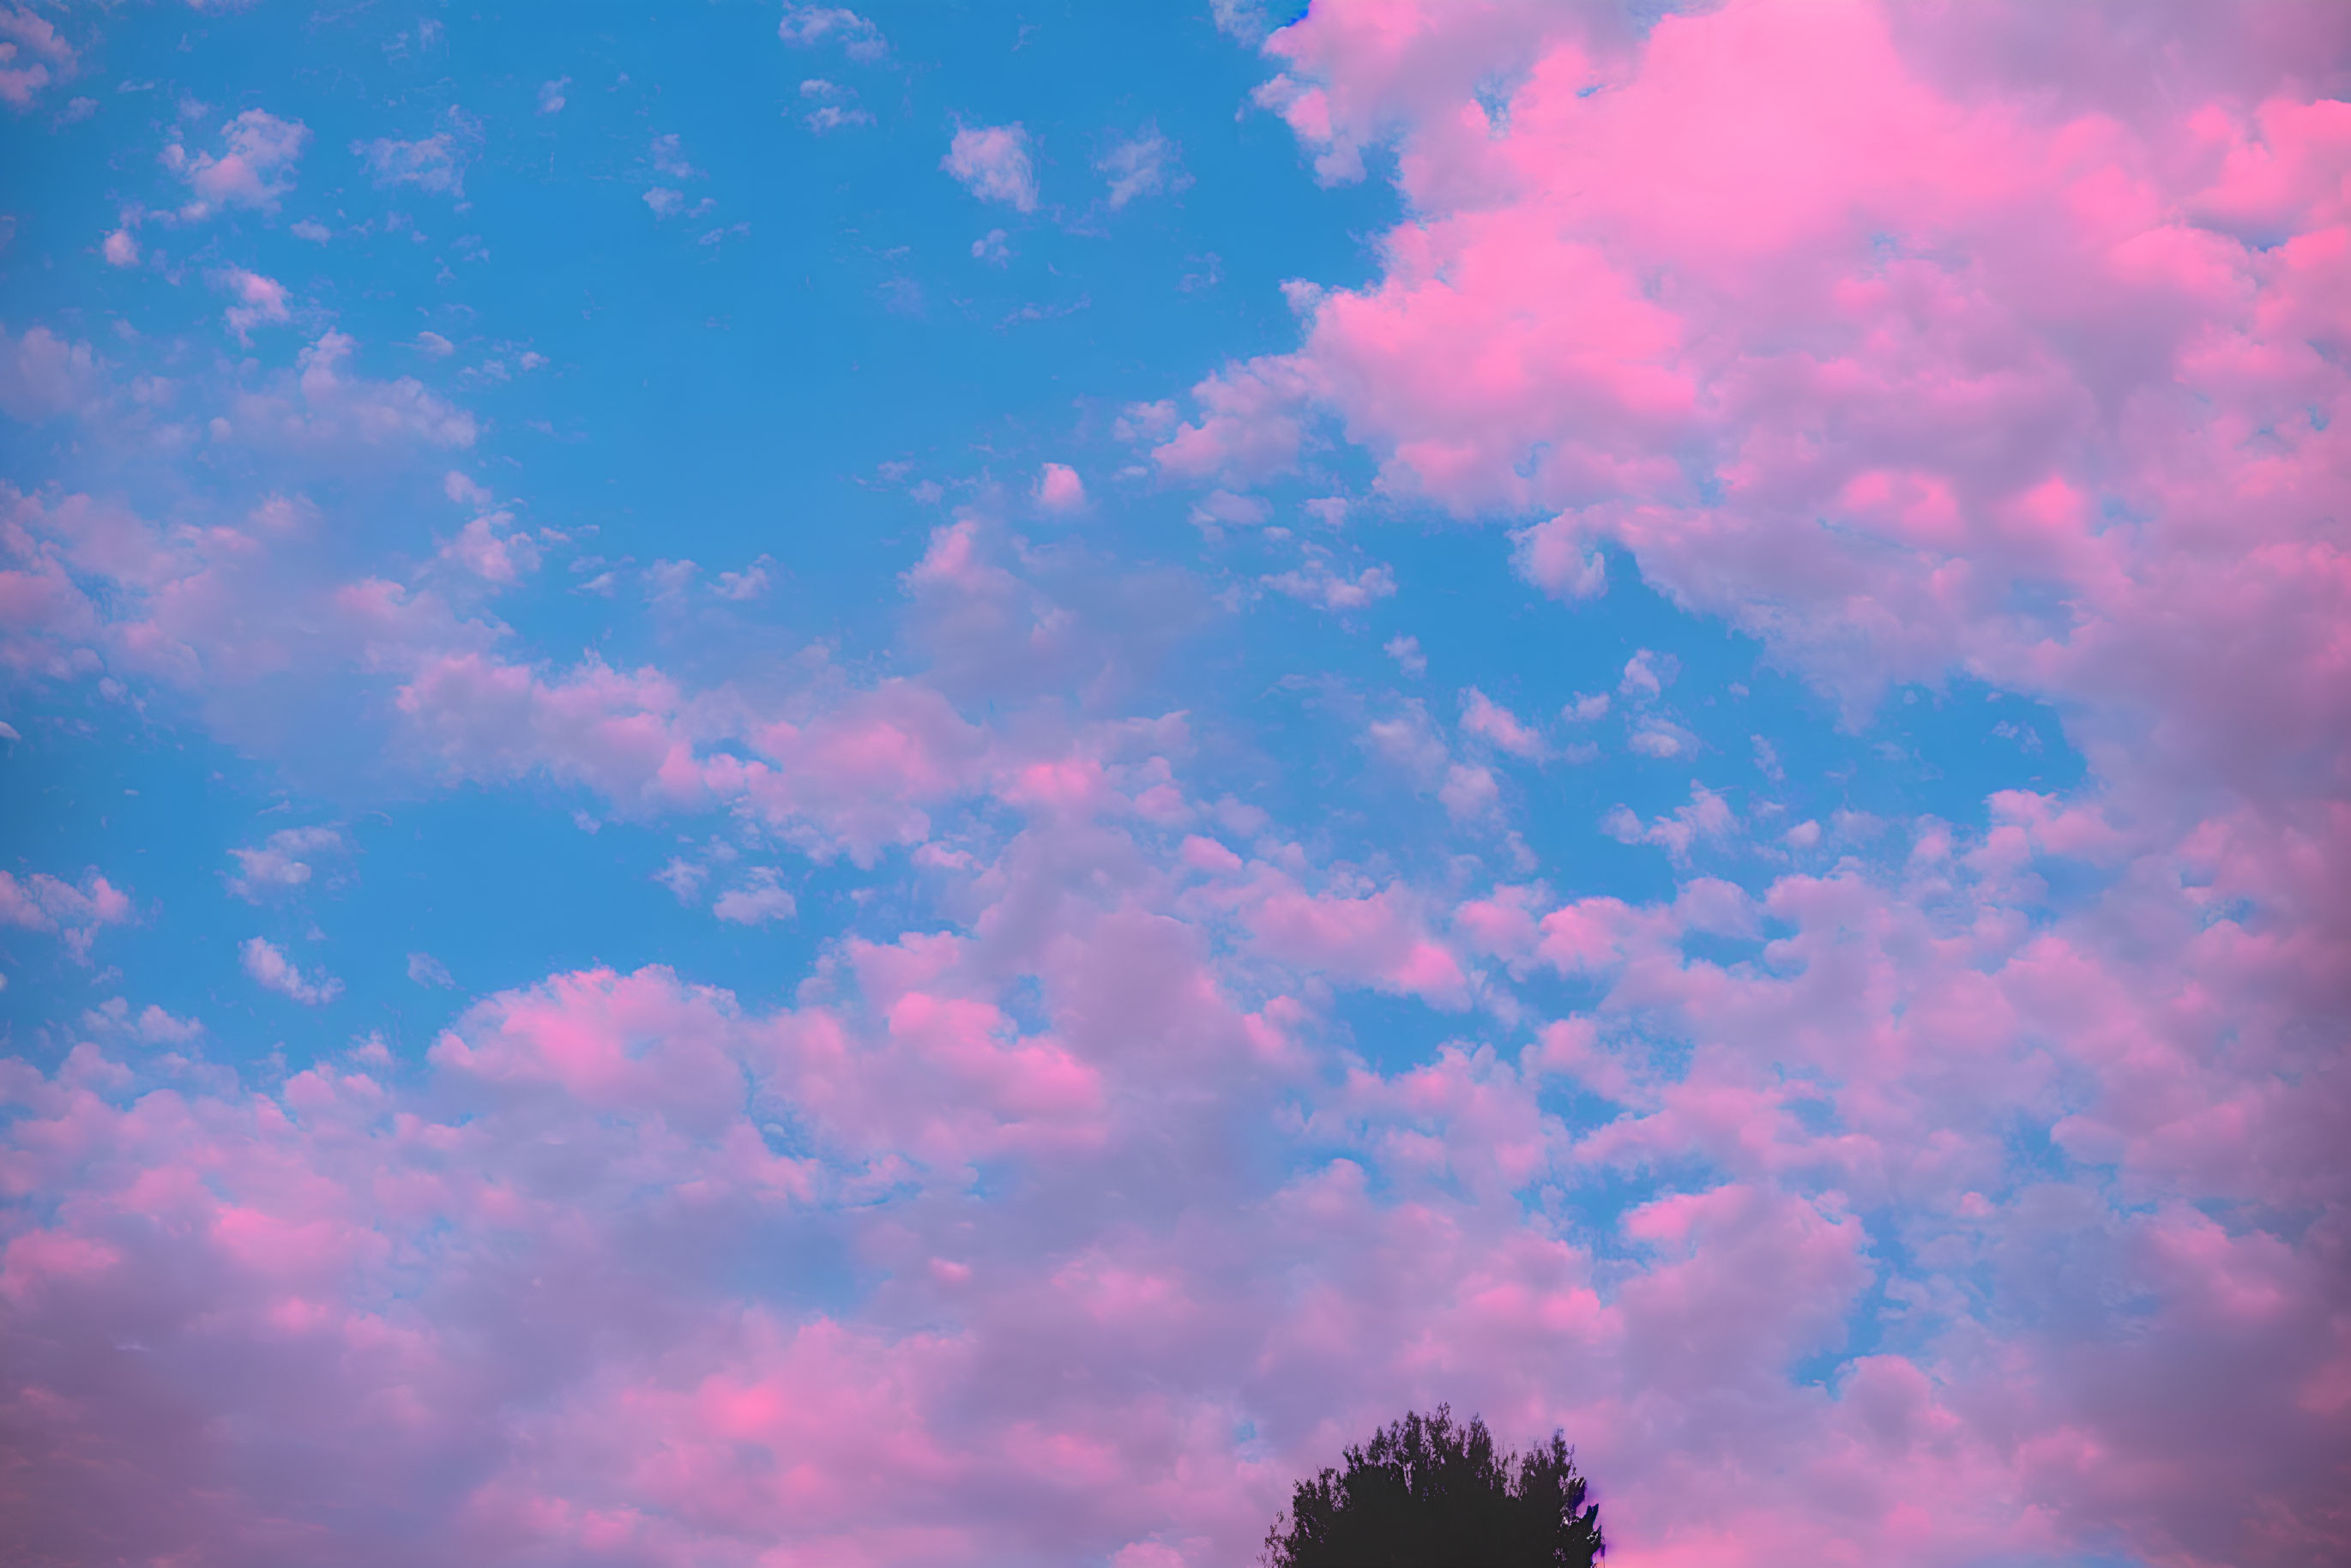 Colorful pink and blue sky with fluffy clouds and lone tree top.